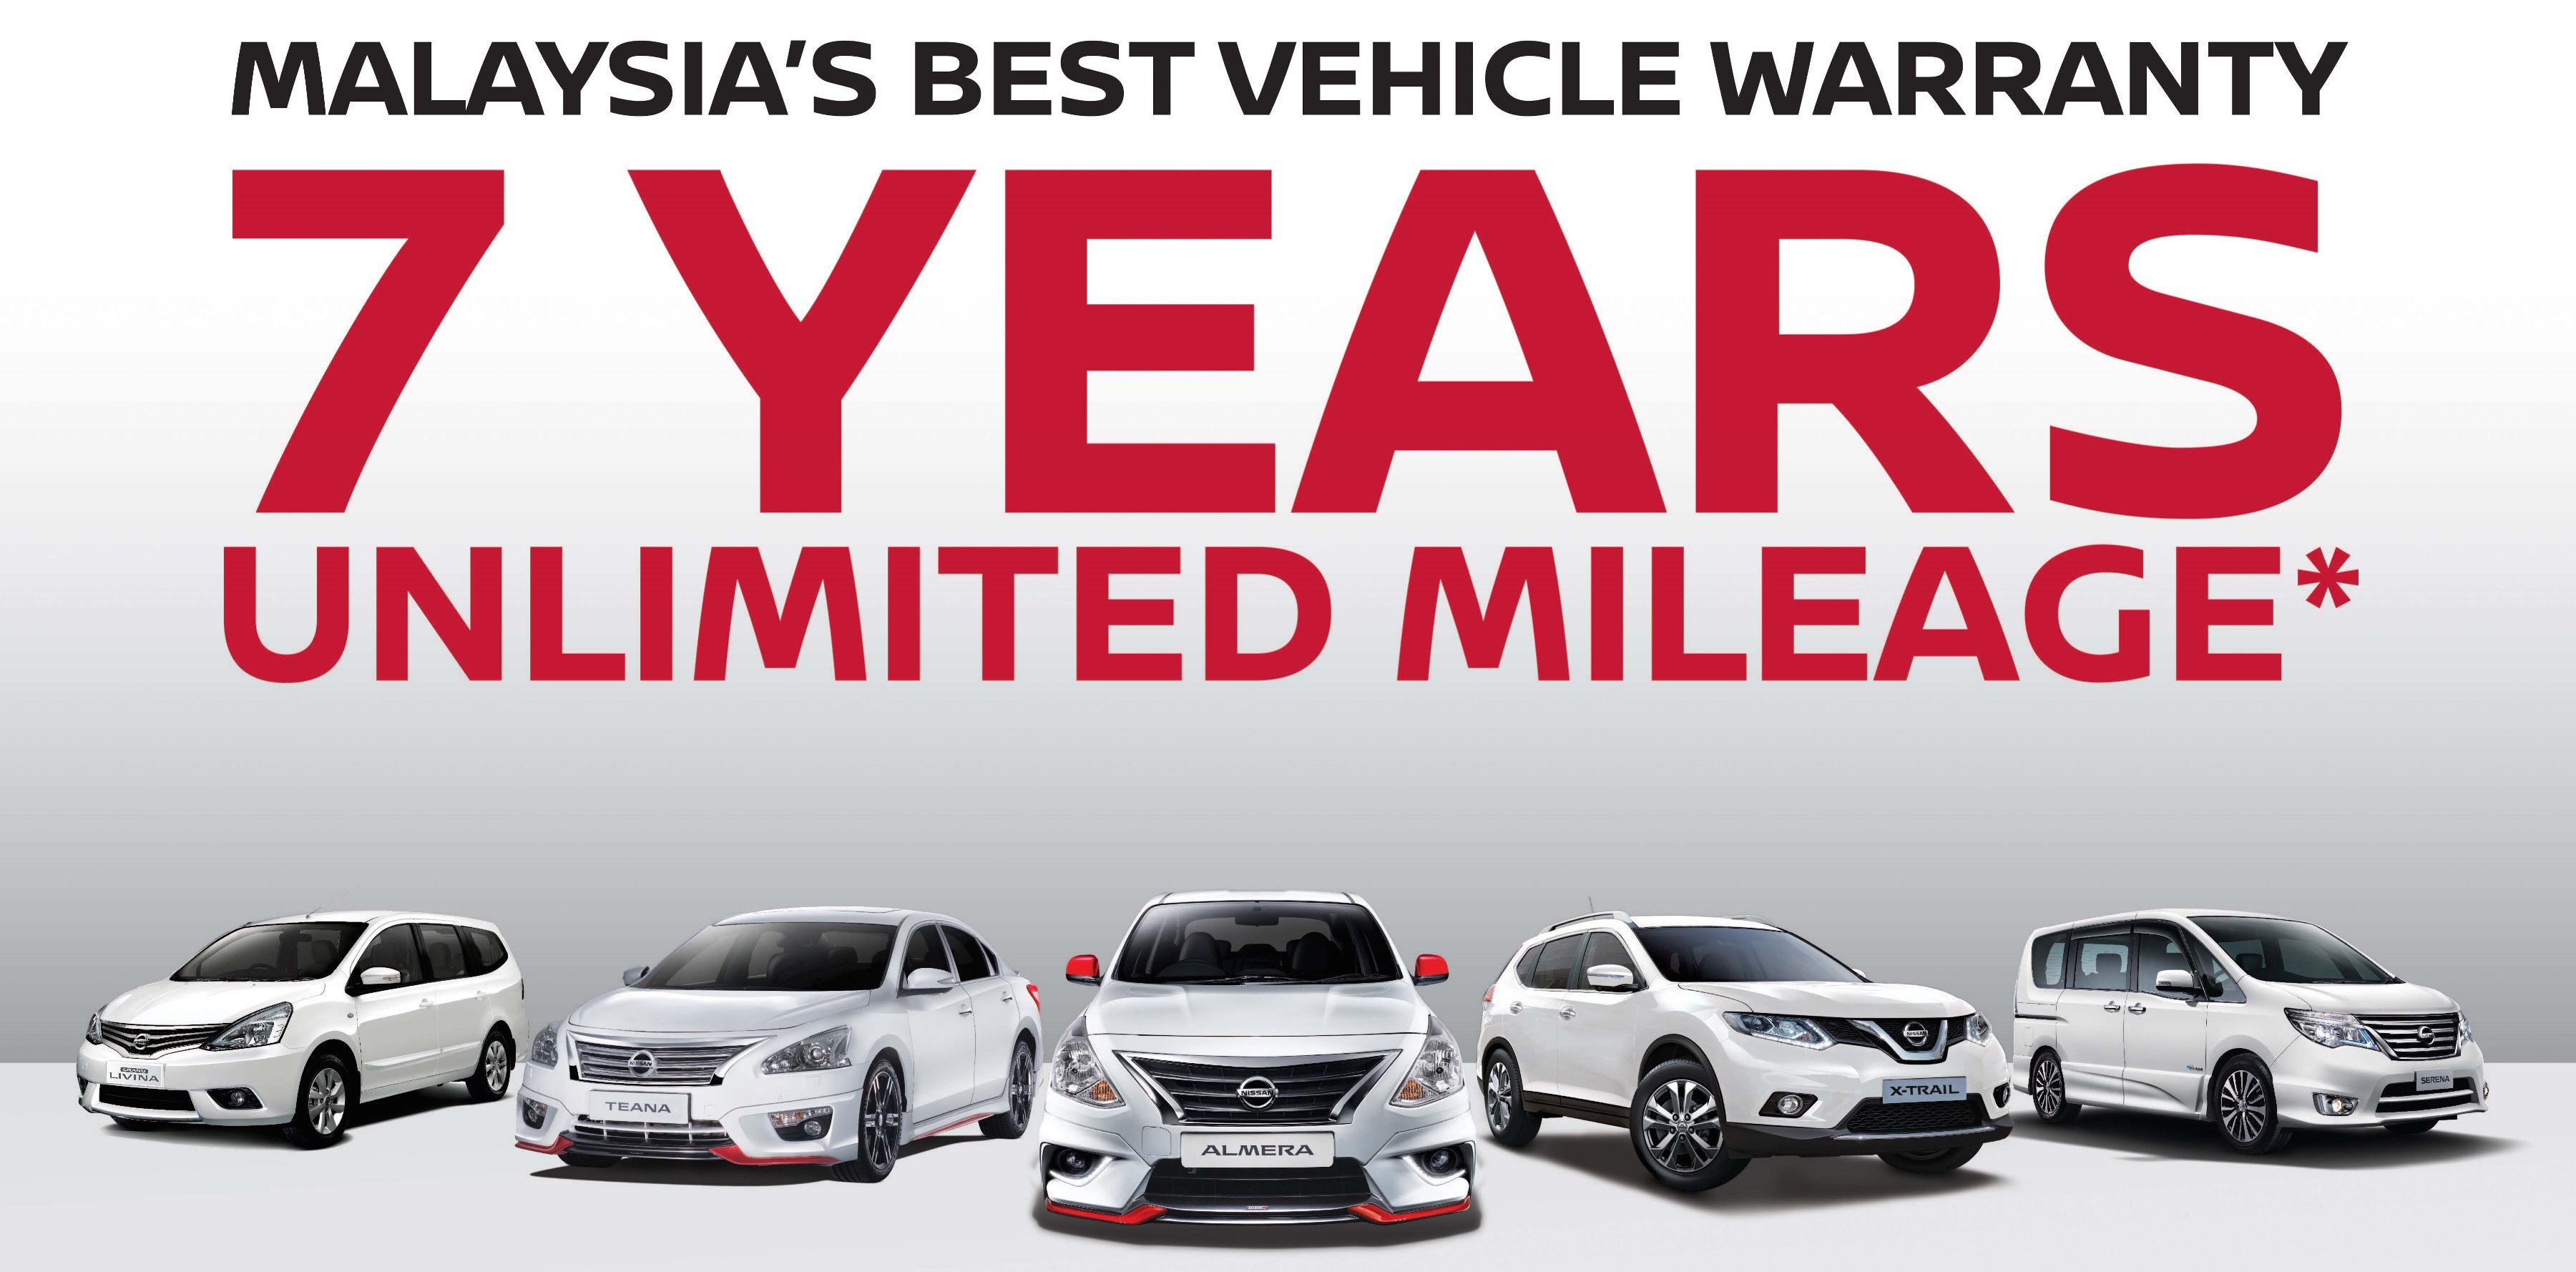 Nissan and Infiniti now provide a sevenyear, unlimited mileage